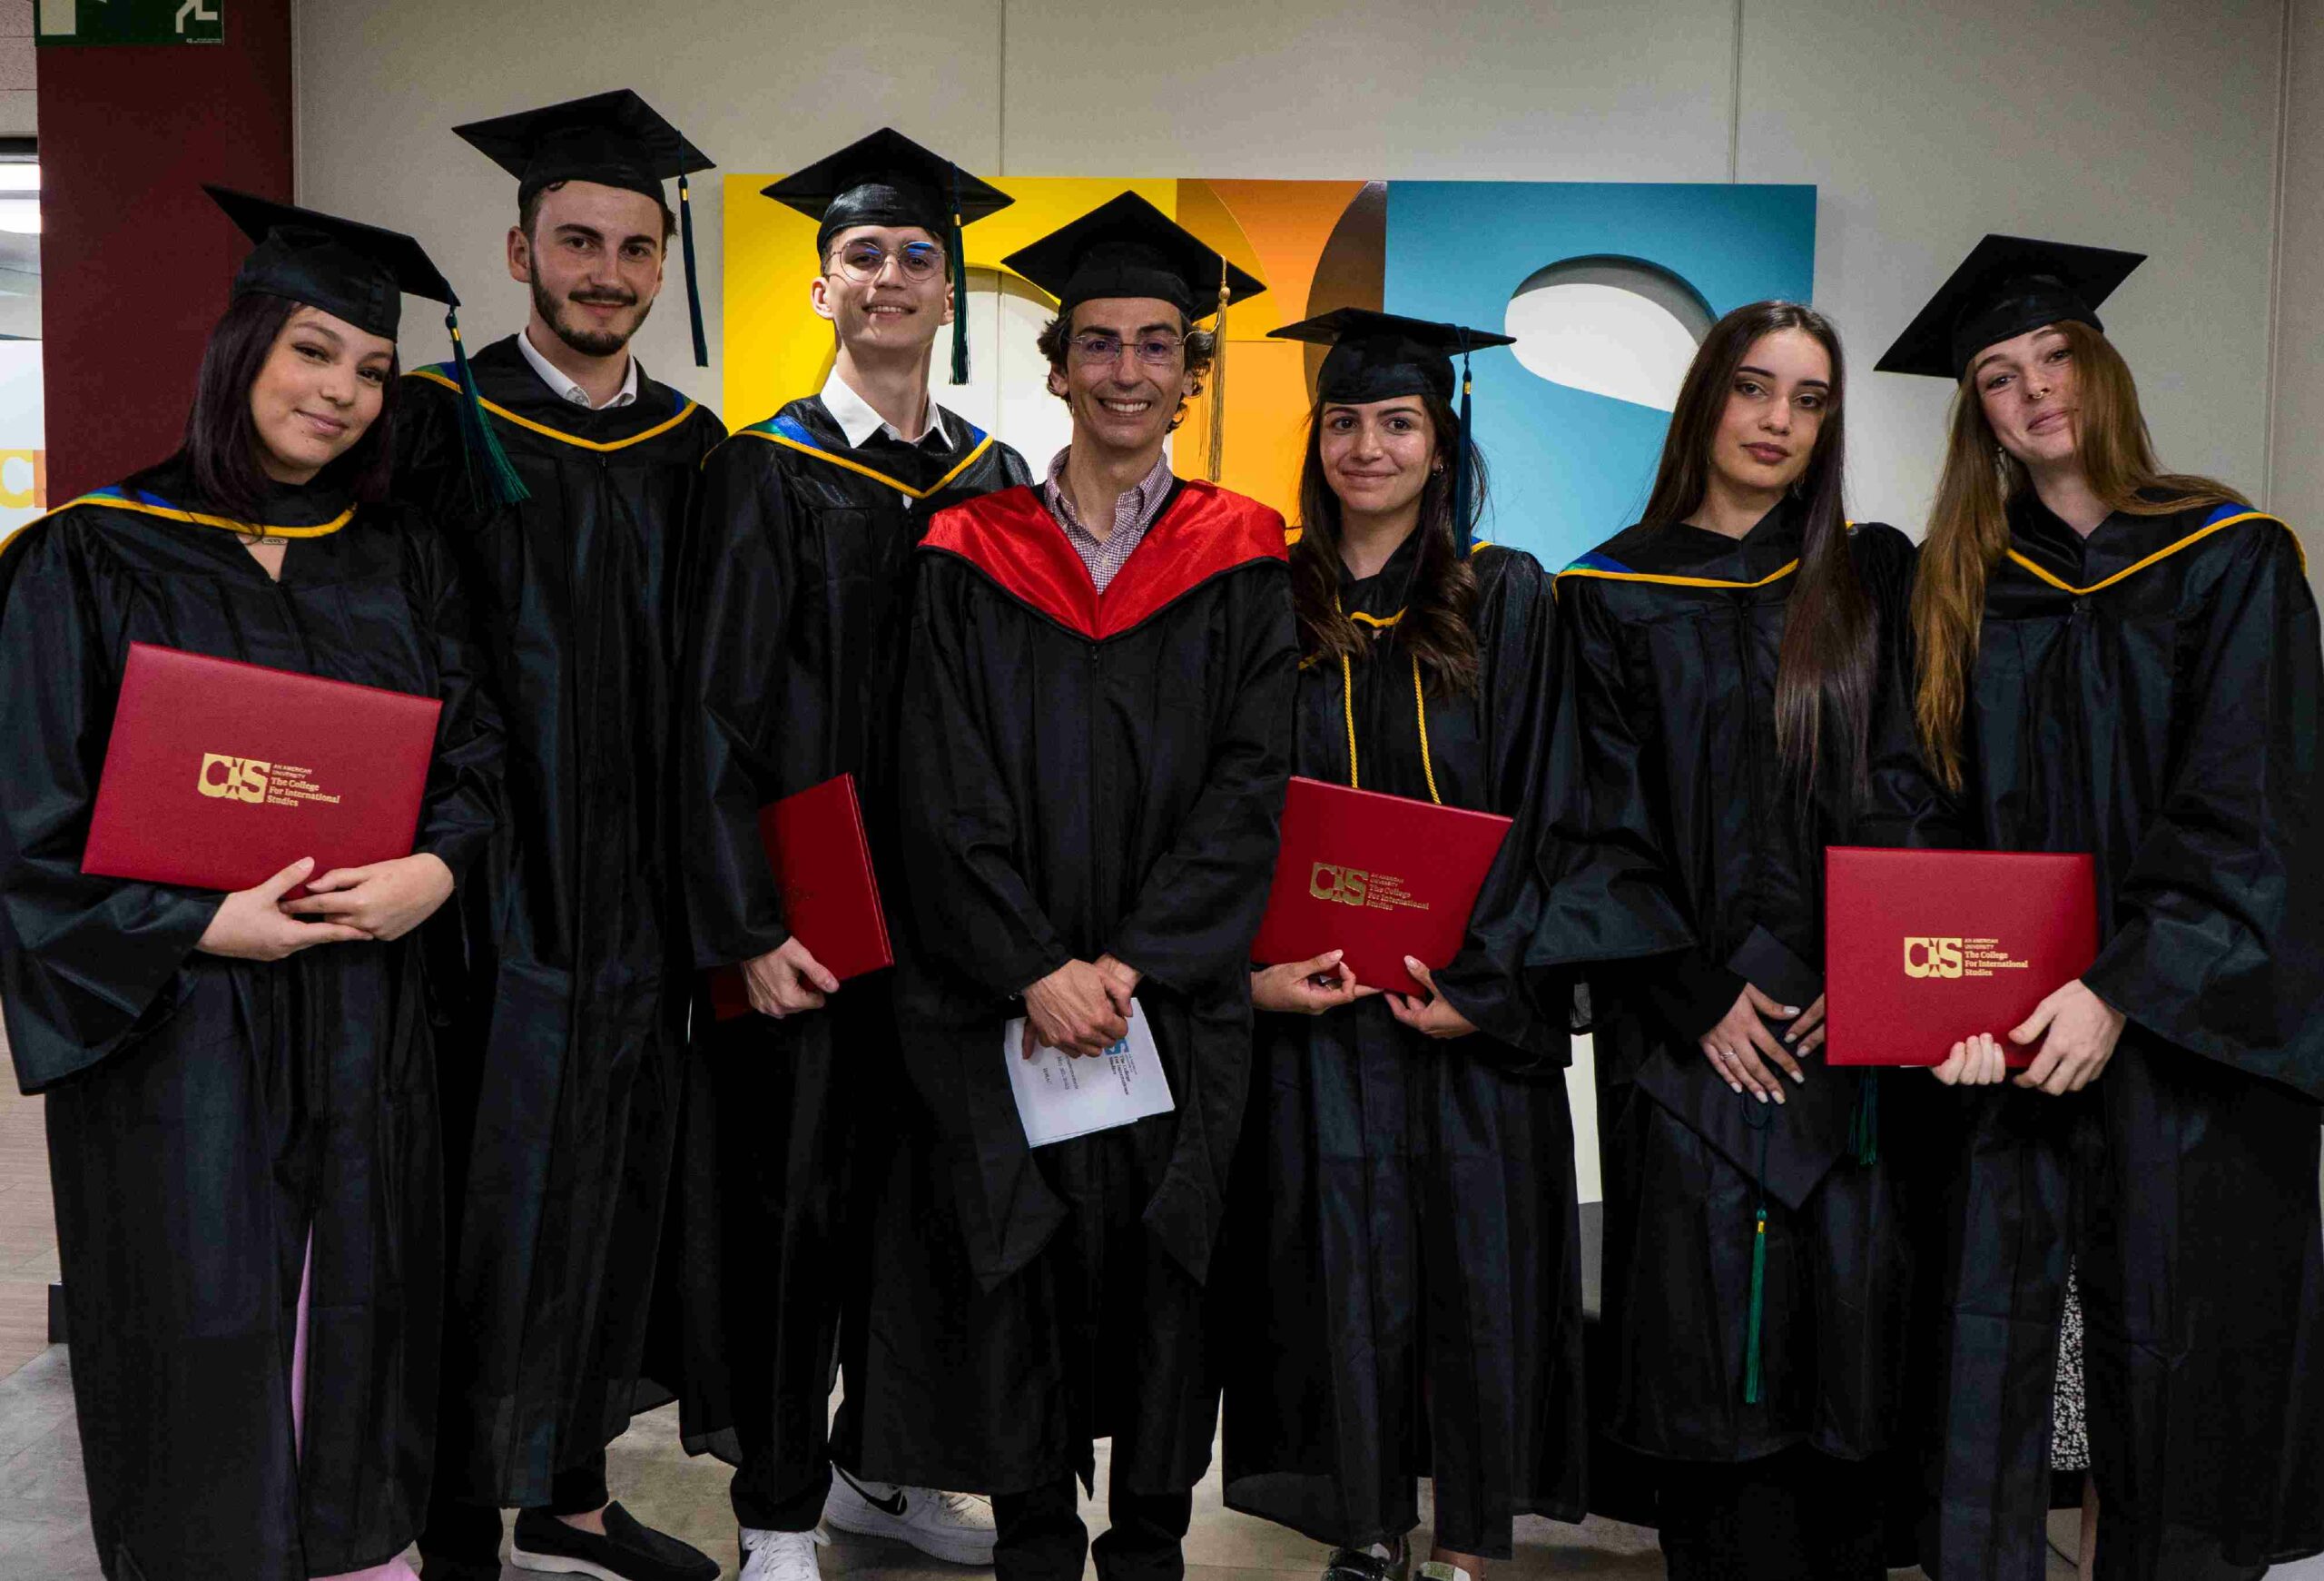 CIS University Graduation from a Year Study Abroad Program A Life Changing Experience